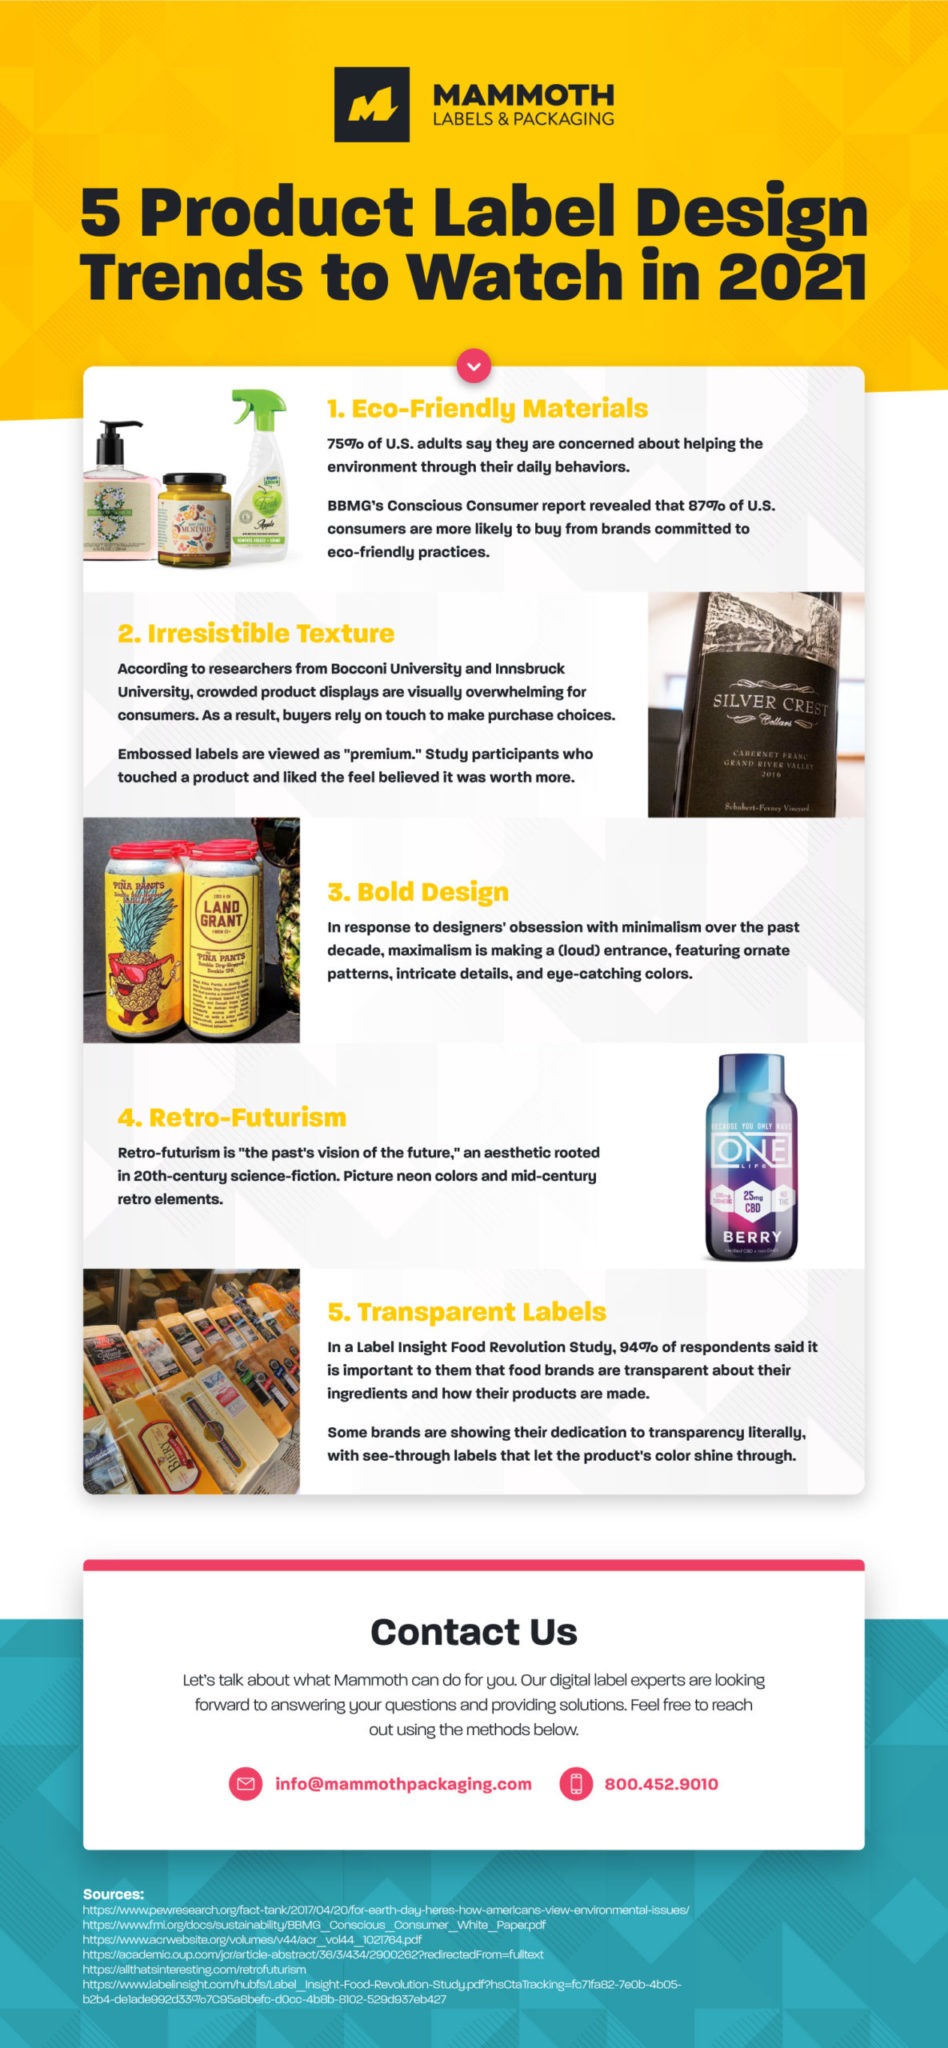 5 Product Label Design Trends to Watch in 2021 Mammoth Labels & Packaging